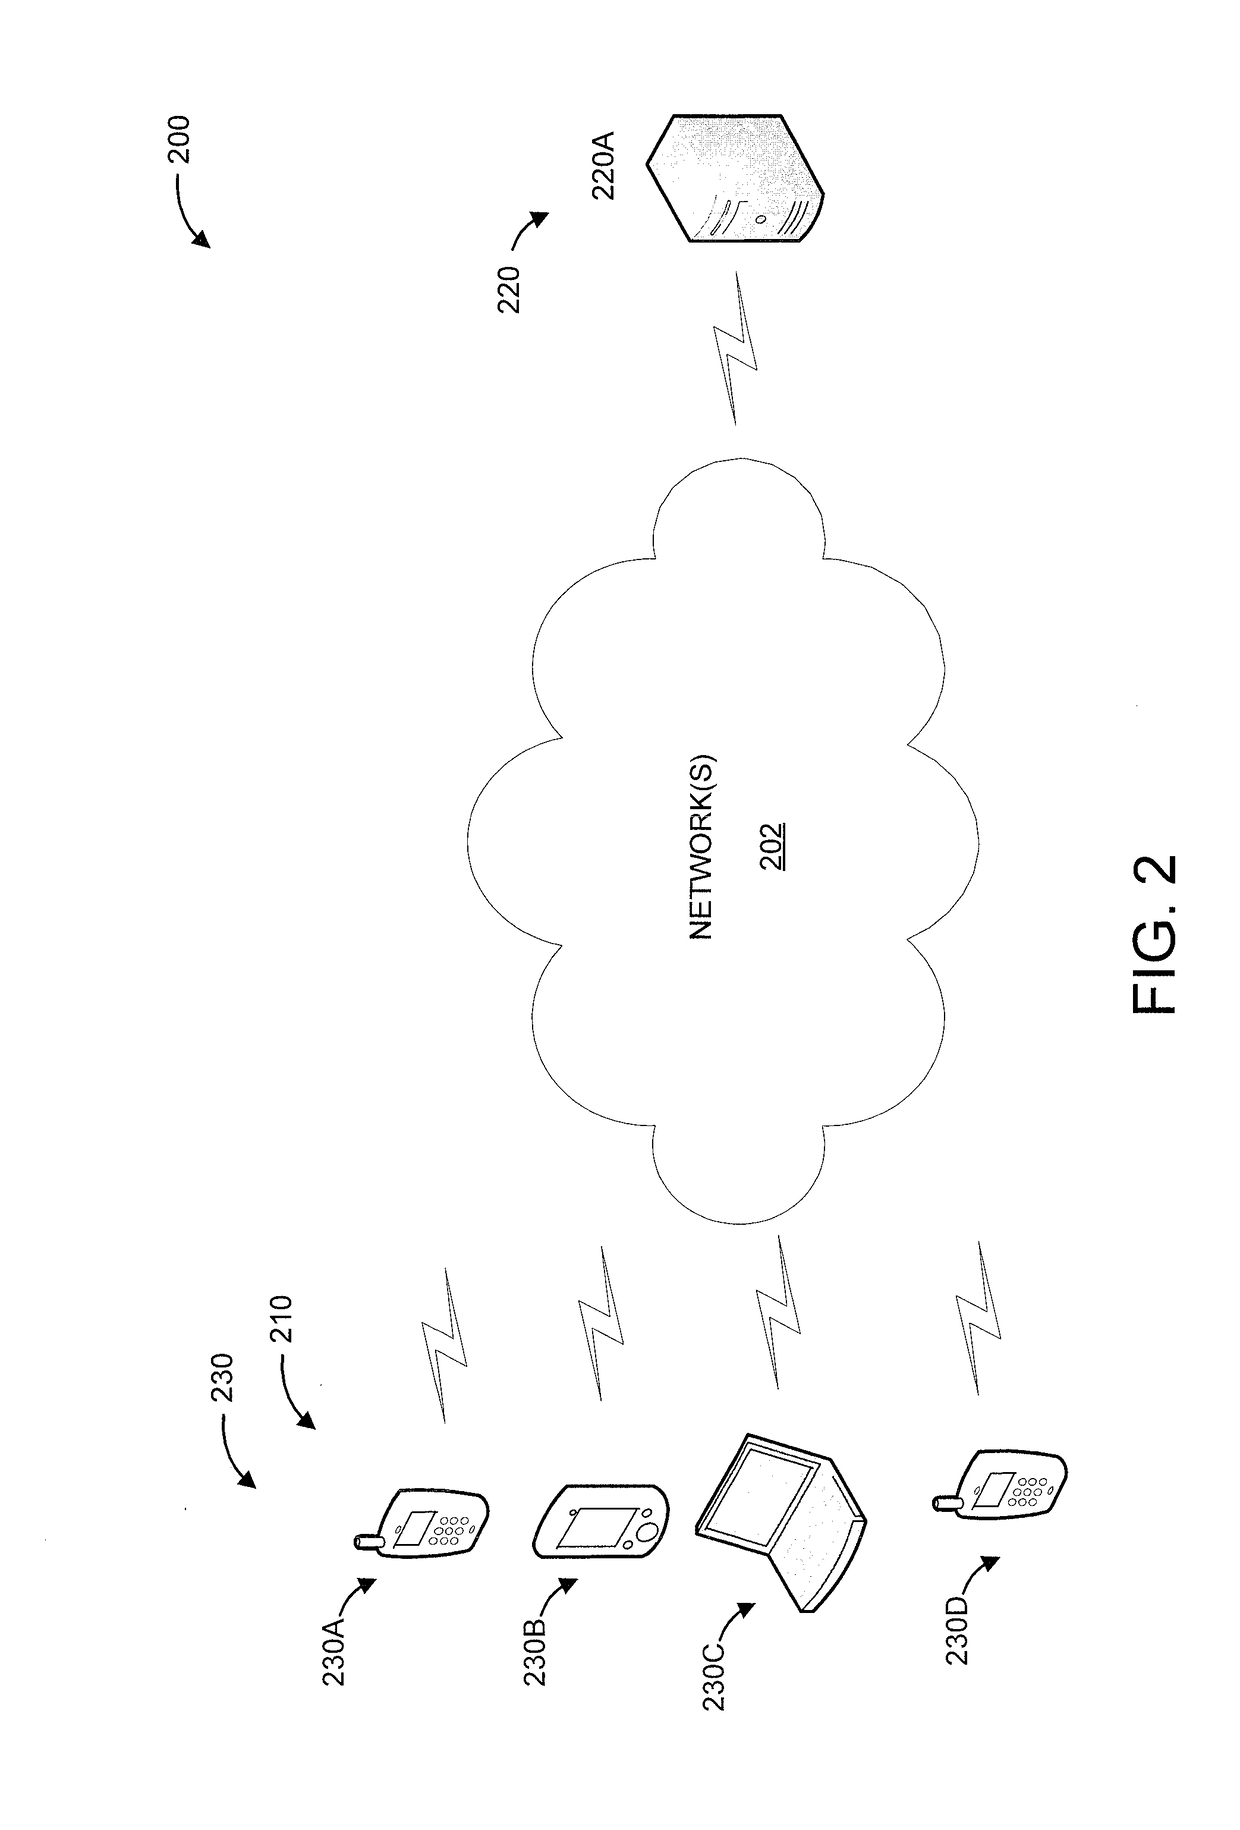 Communication between devices to determine priority of charging